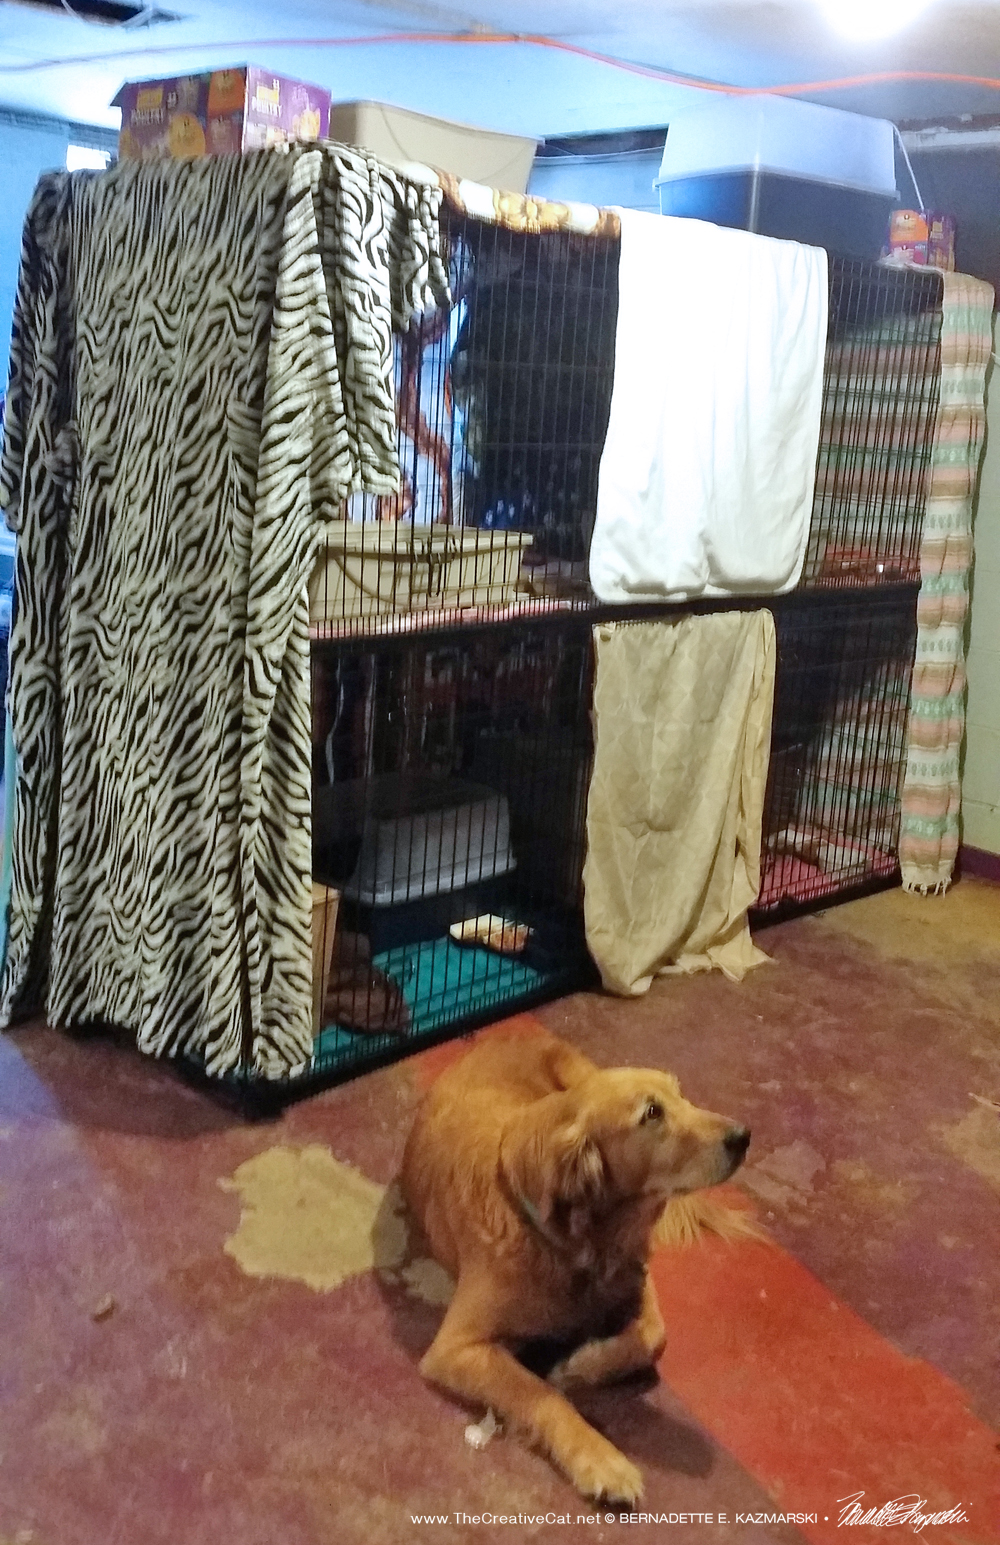 The setup with four cages with Bella the dog watching over them.